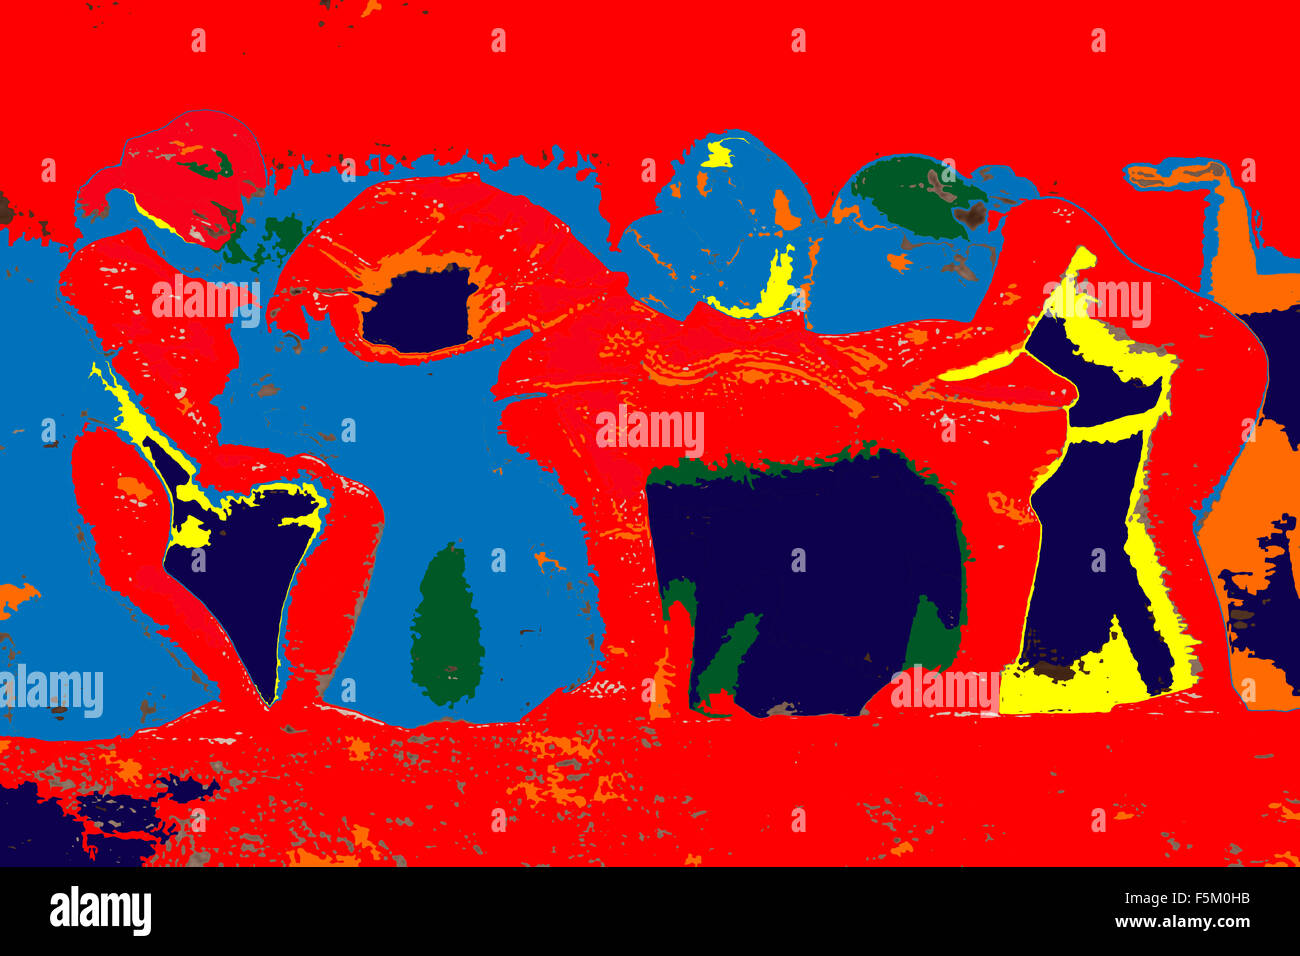 Abstract art painting, india, asia Stock Photo